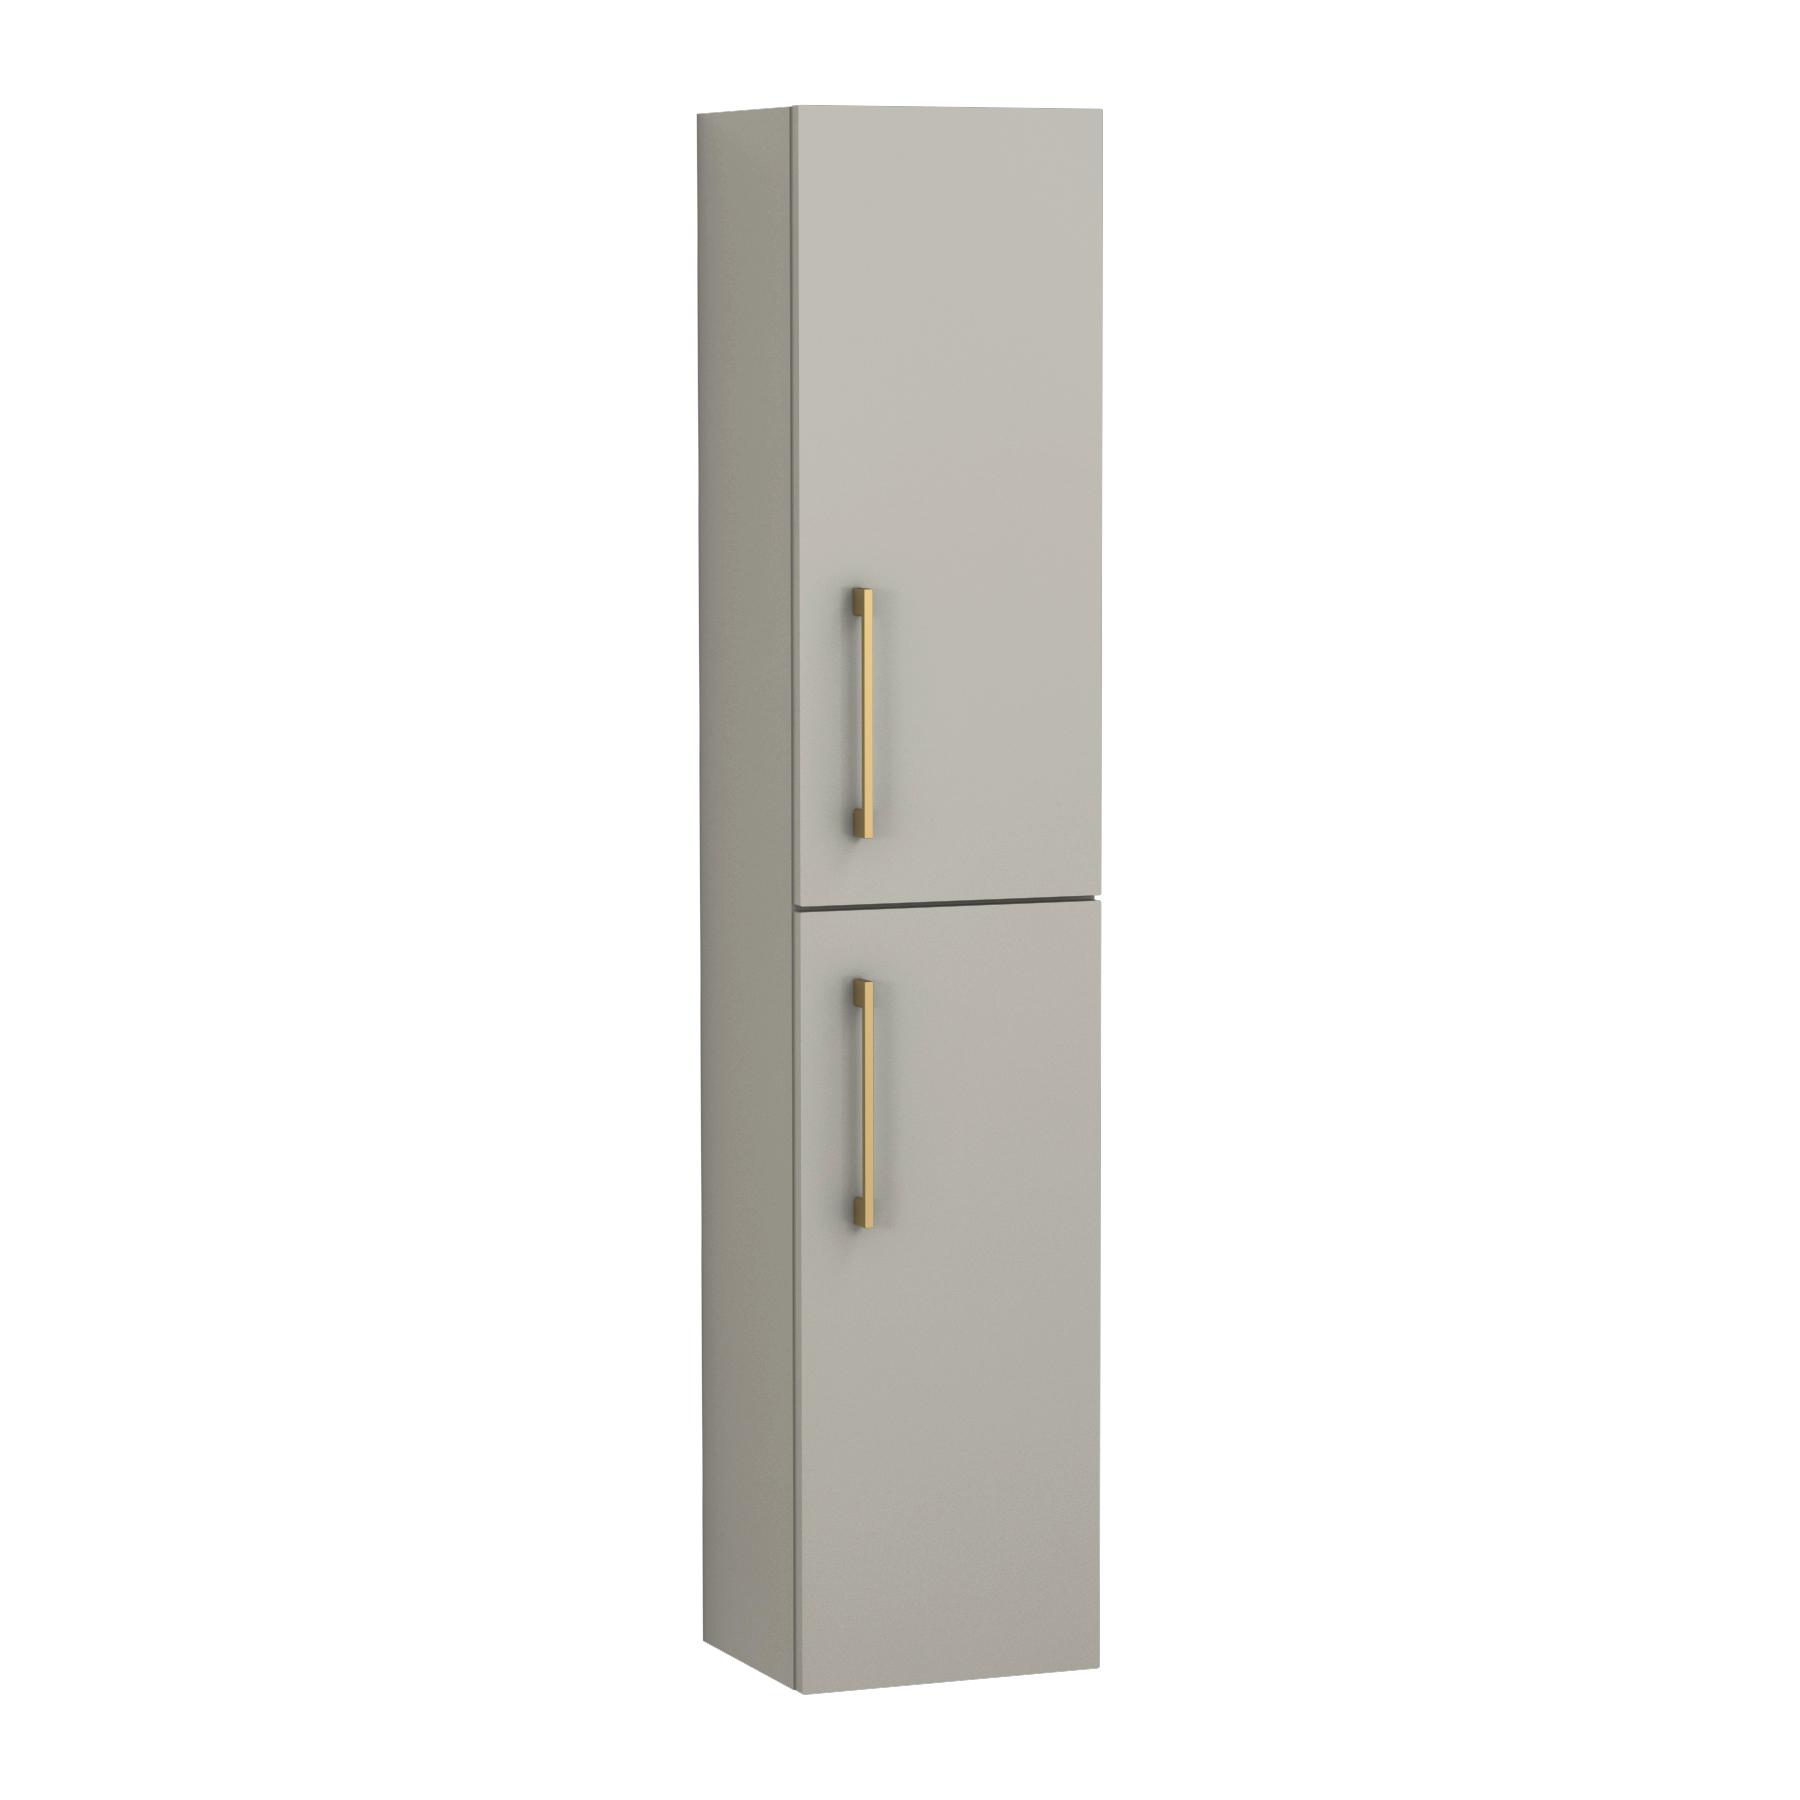 Modena 300mm Satin Grey 2 Door Wall Hung Tall Boy Brushed Brass Handle Cabinet Storage Unit